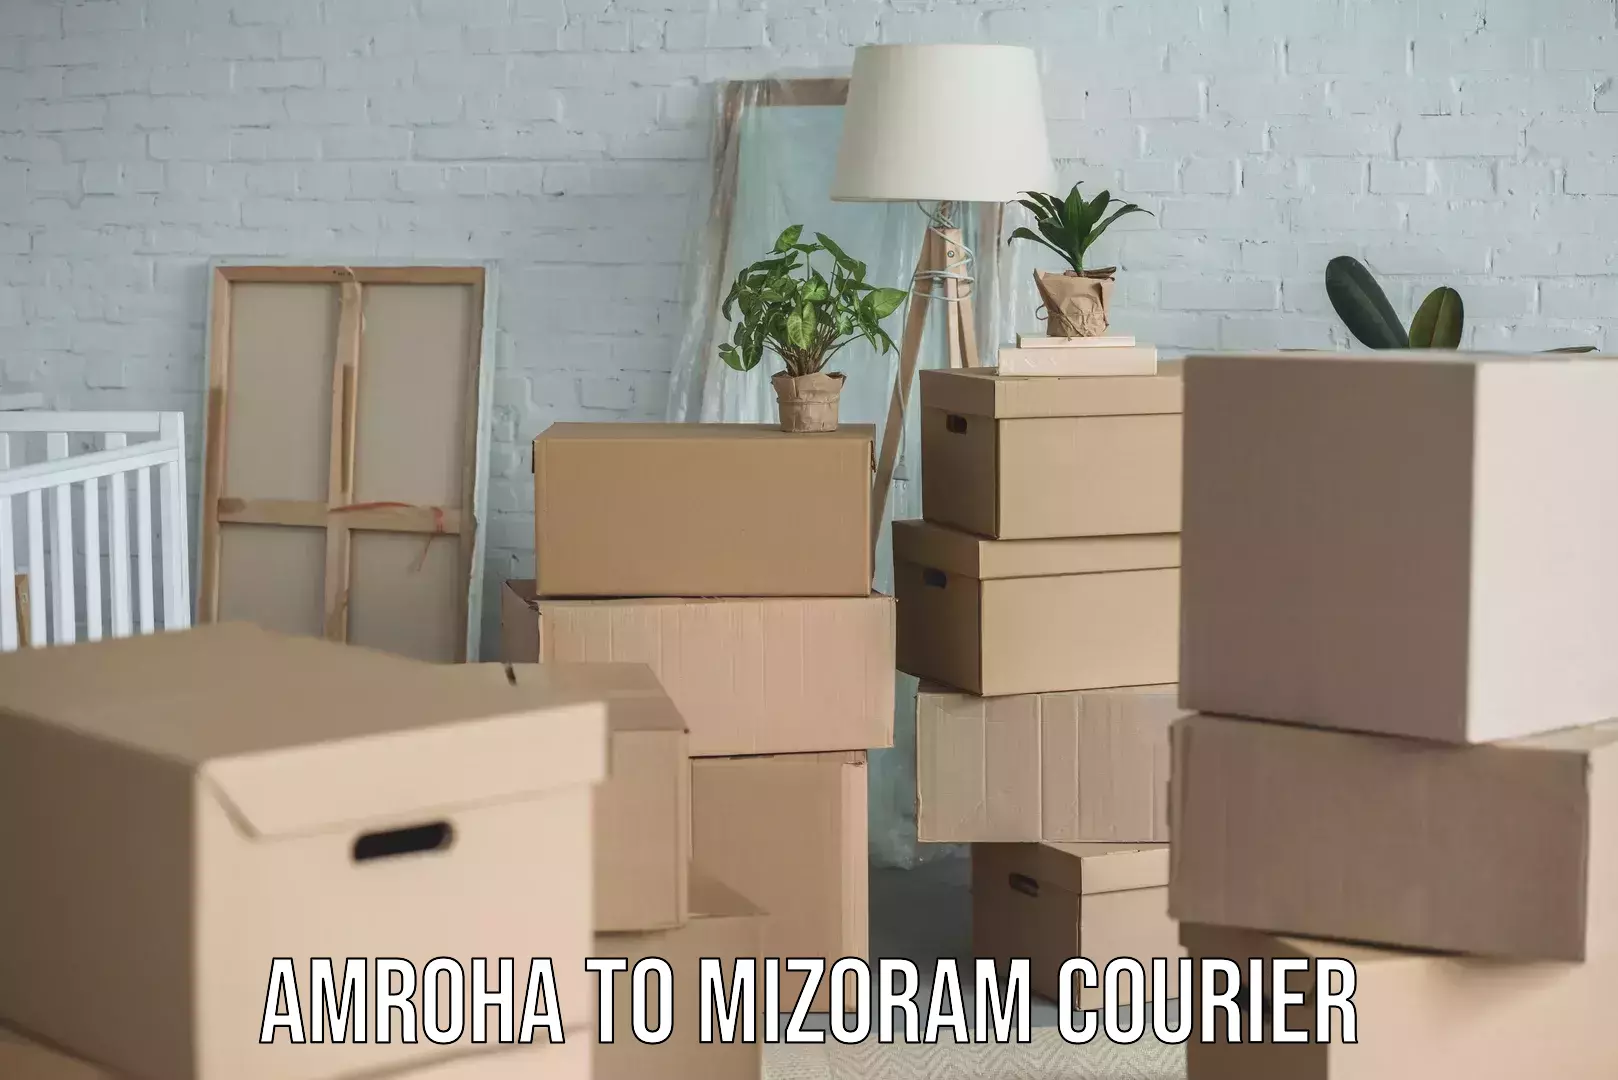 Same-day delivery solutions Amroha to Mizoram